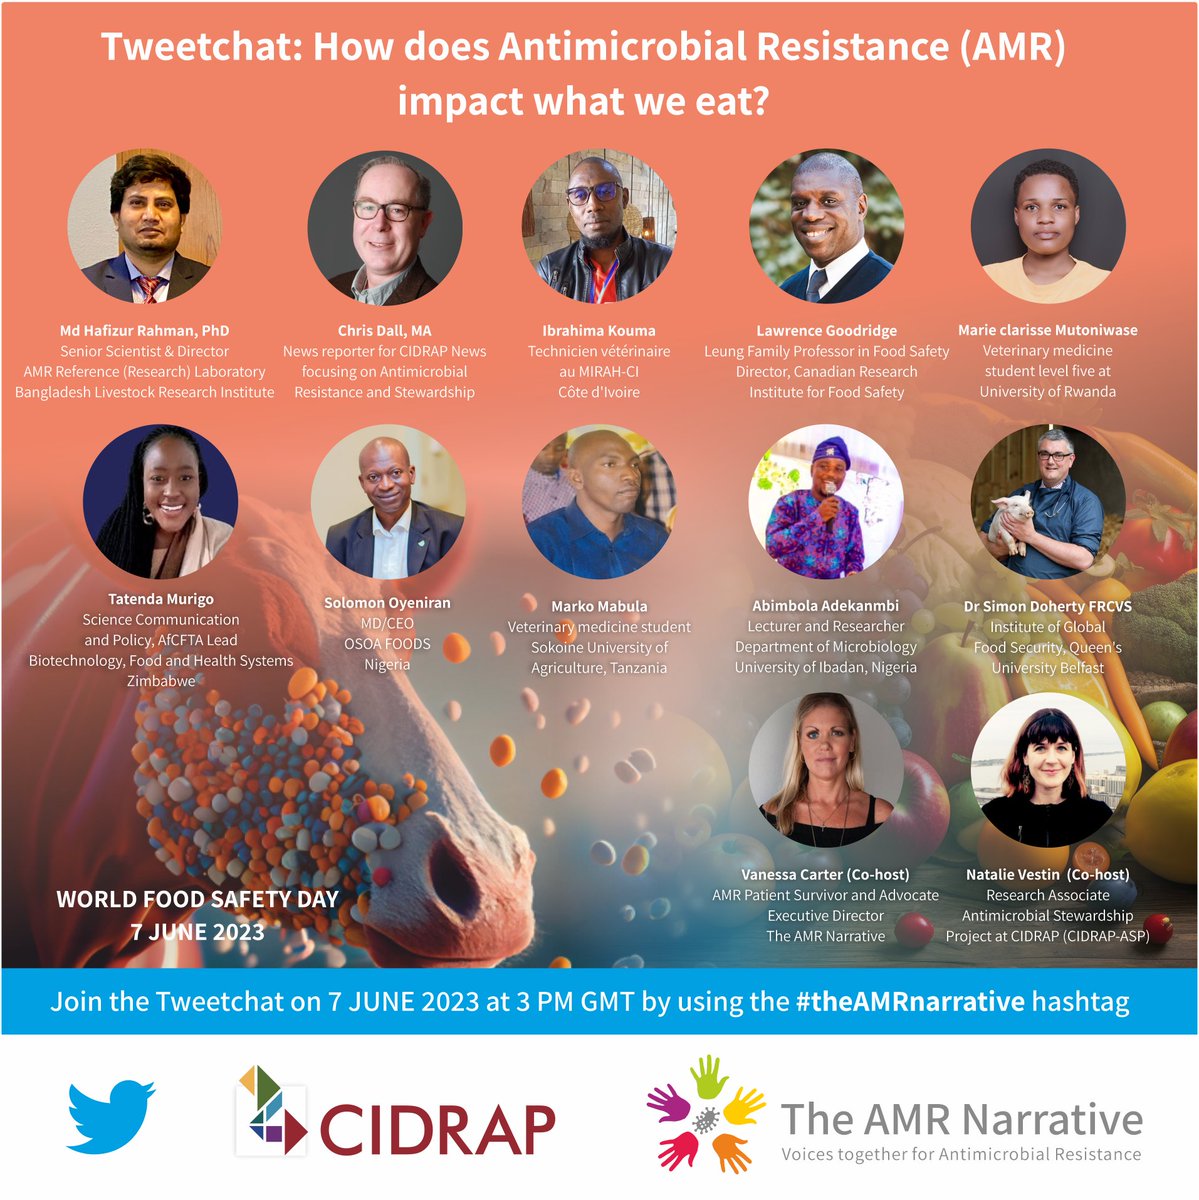 Another Tweetchat on #FoodSafety Day focused on #AMR & the impact on foods we eat! 

Everyone welcome, incl #PatientAdvocates, #ConsumerAdvocates & professionals working in this field!

Co-hosted by @natalievestin from @CIDRAP_ASP & myself from @theAMRnarrative 

#theAMRnarrative